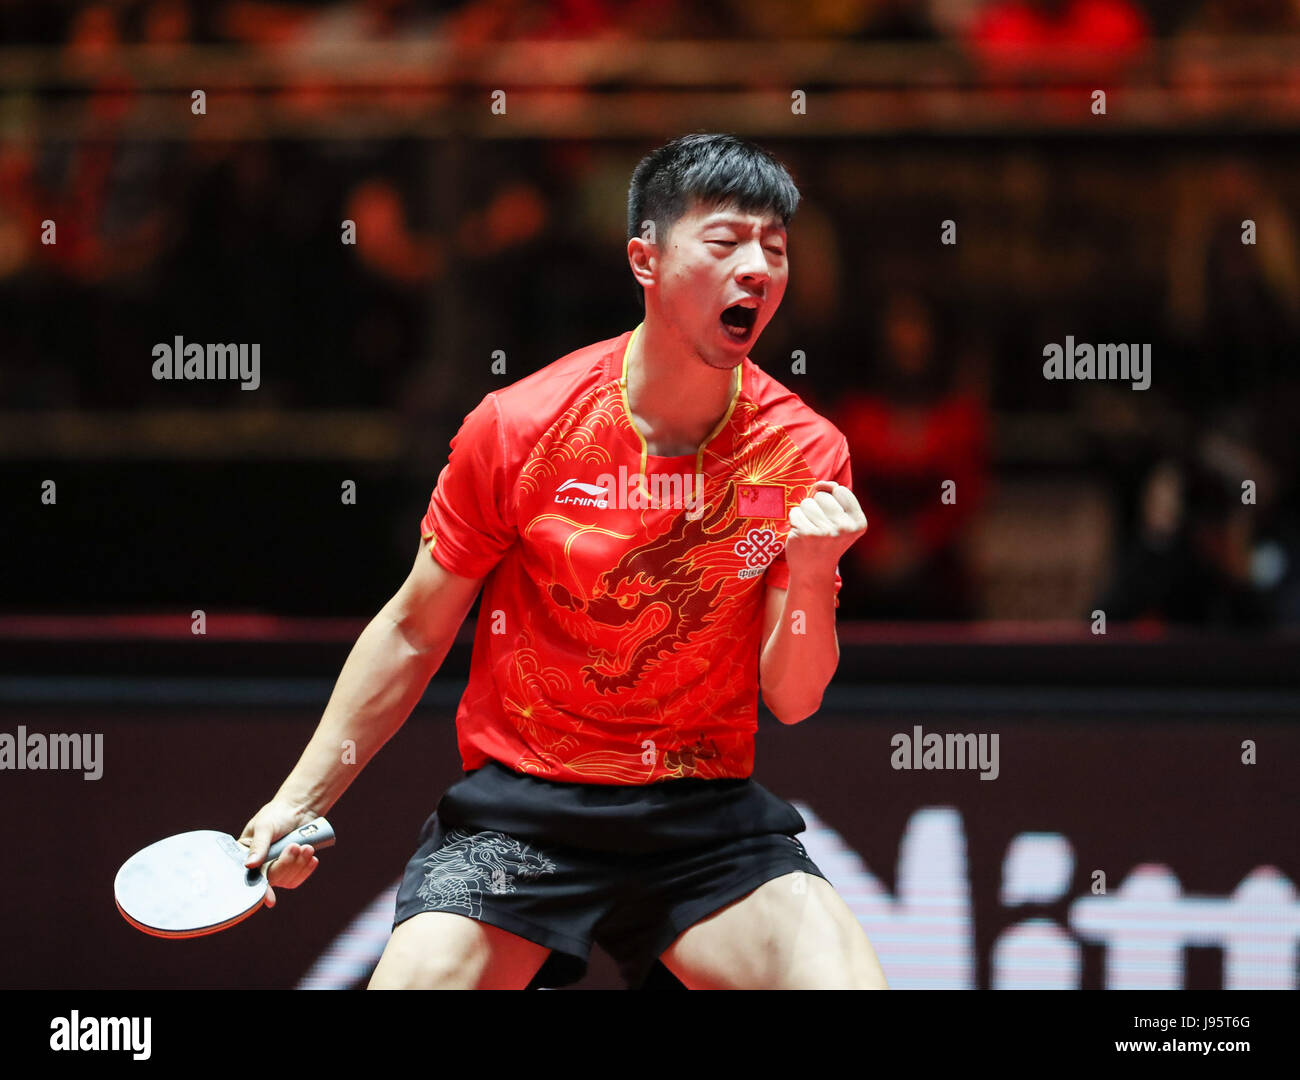 Dusseldorf, Germany. 5th June, 2017. Ma Long of China celebrates during the  men's singles final match against his compatriot Fan Zhendong at the 2017  World Table Tennis Championships in Dusseldorf, Germany, on